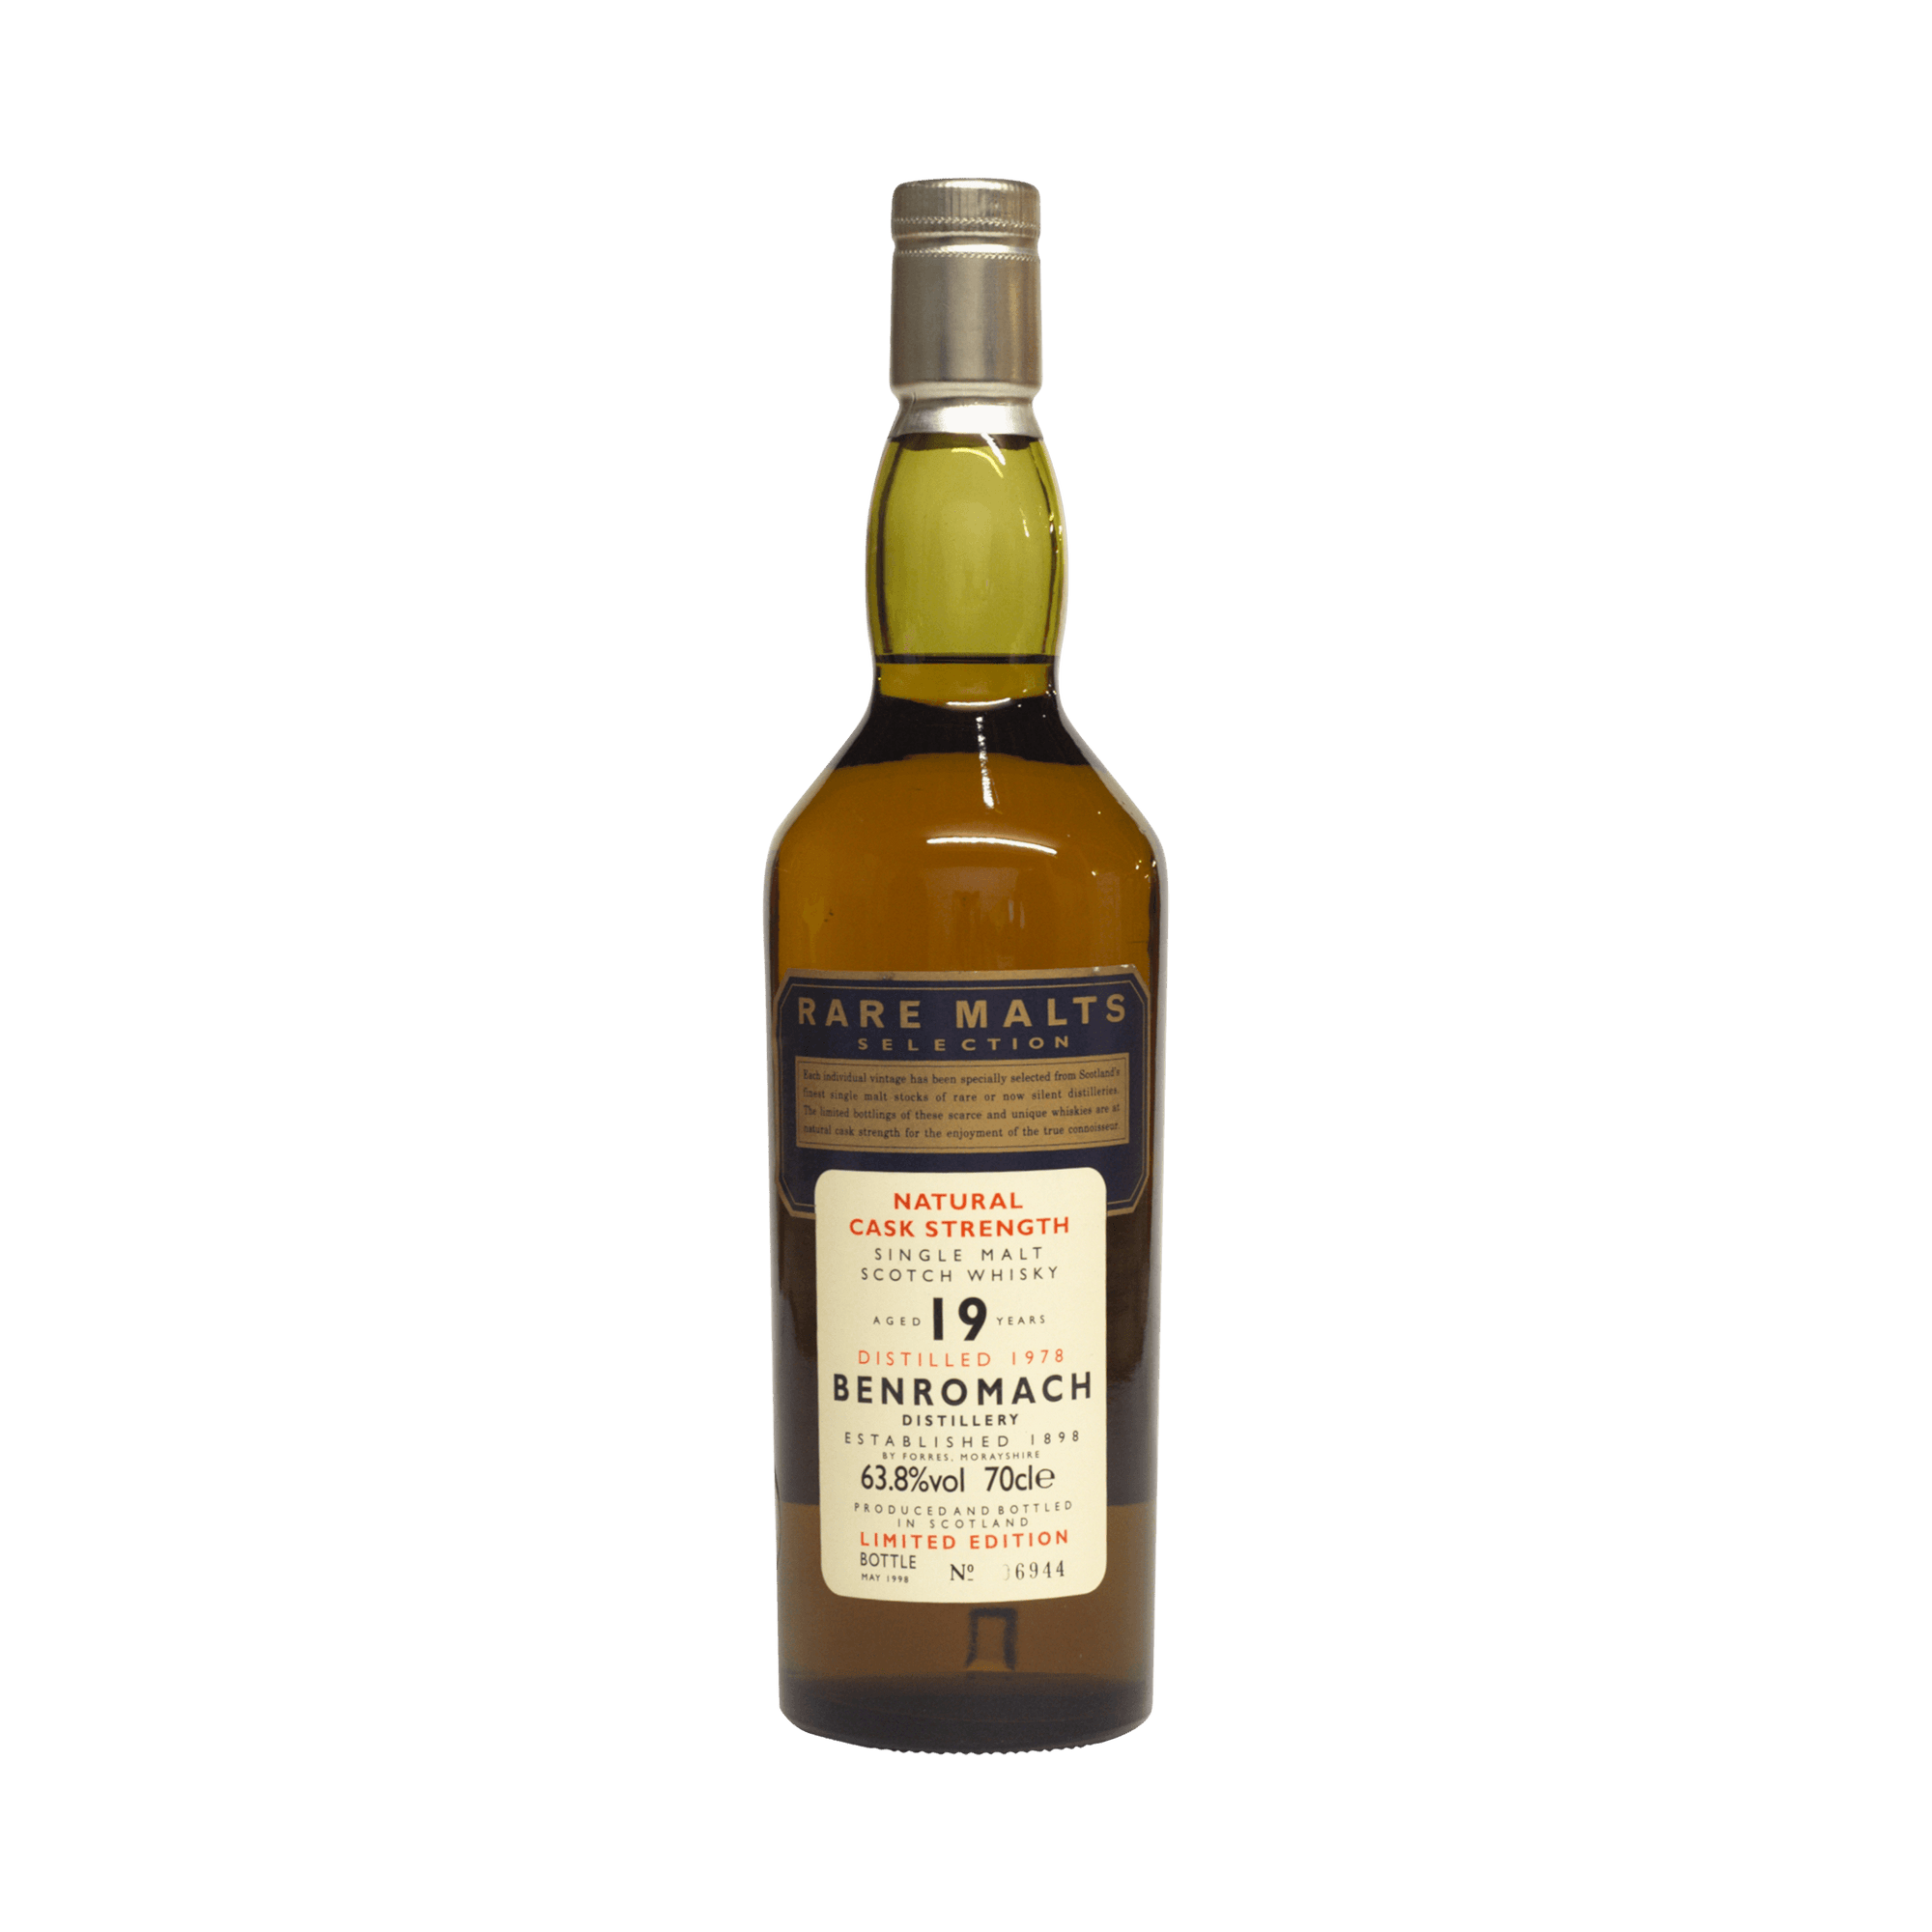 Benromach 1978 20 Year Old Rare Malts Selection 63.80%